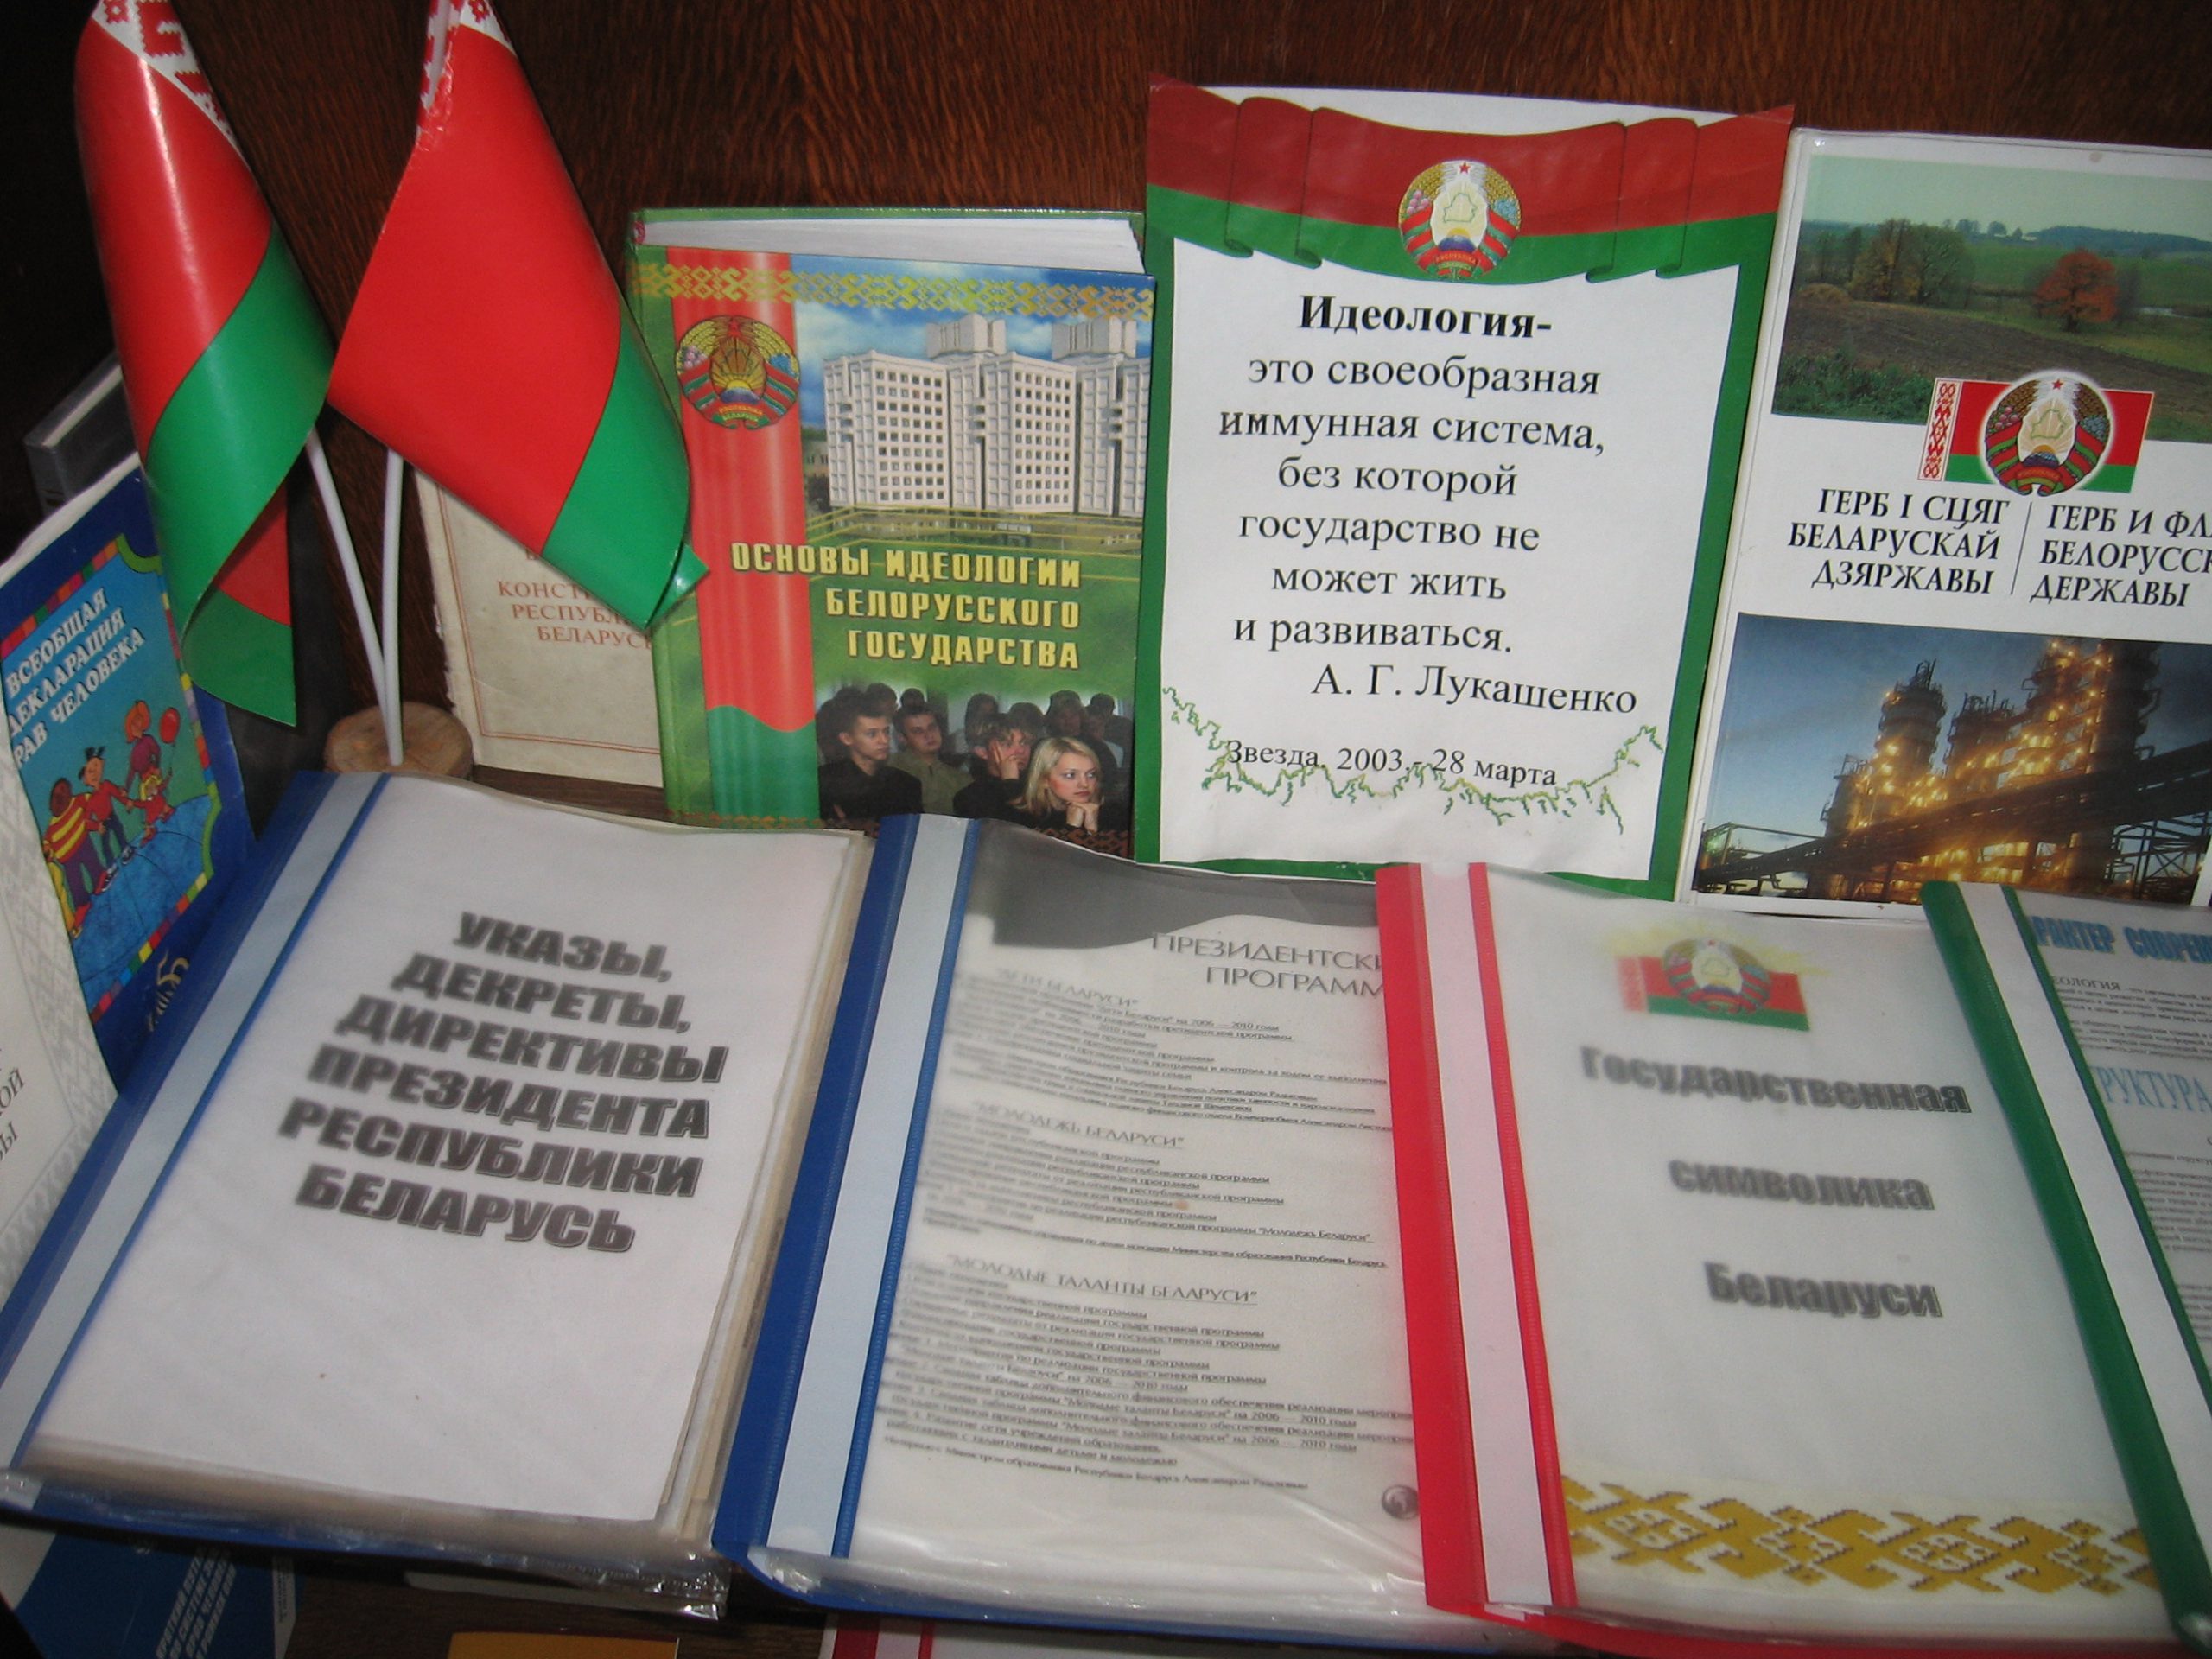 Belarusian authorities want higher impact from ideological outreach